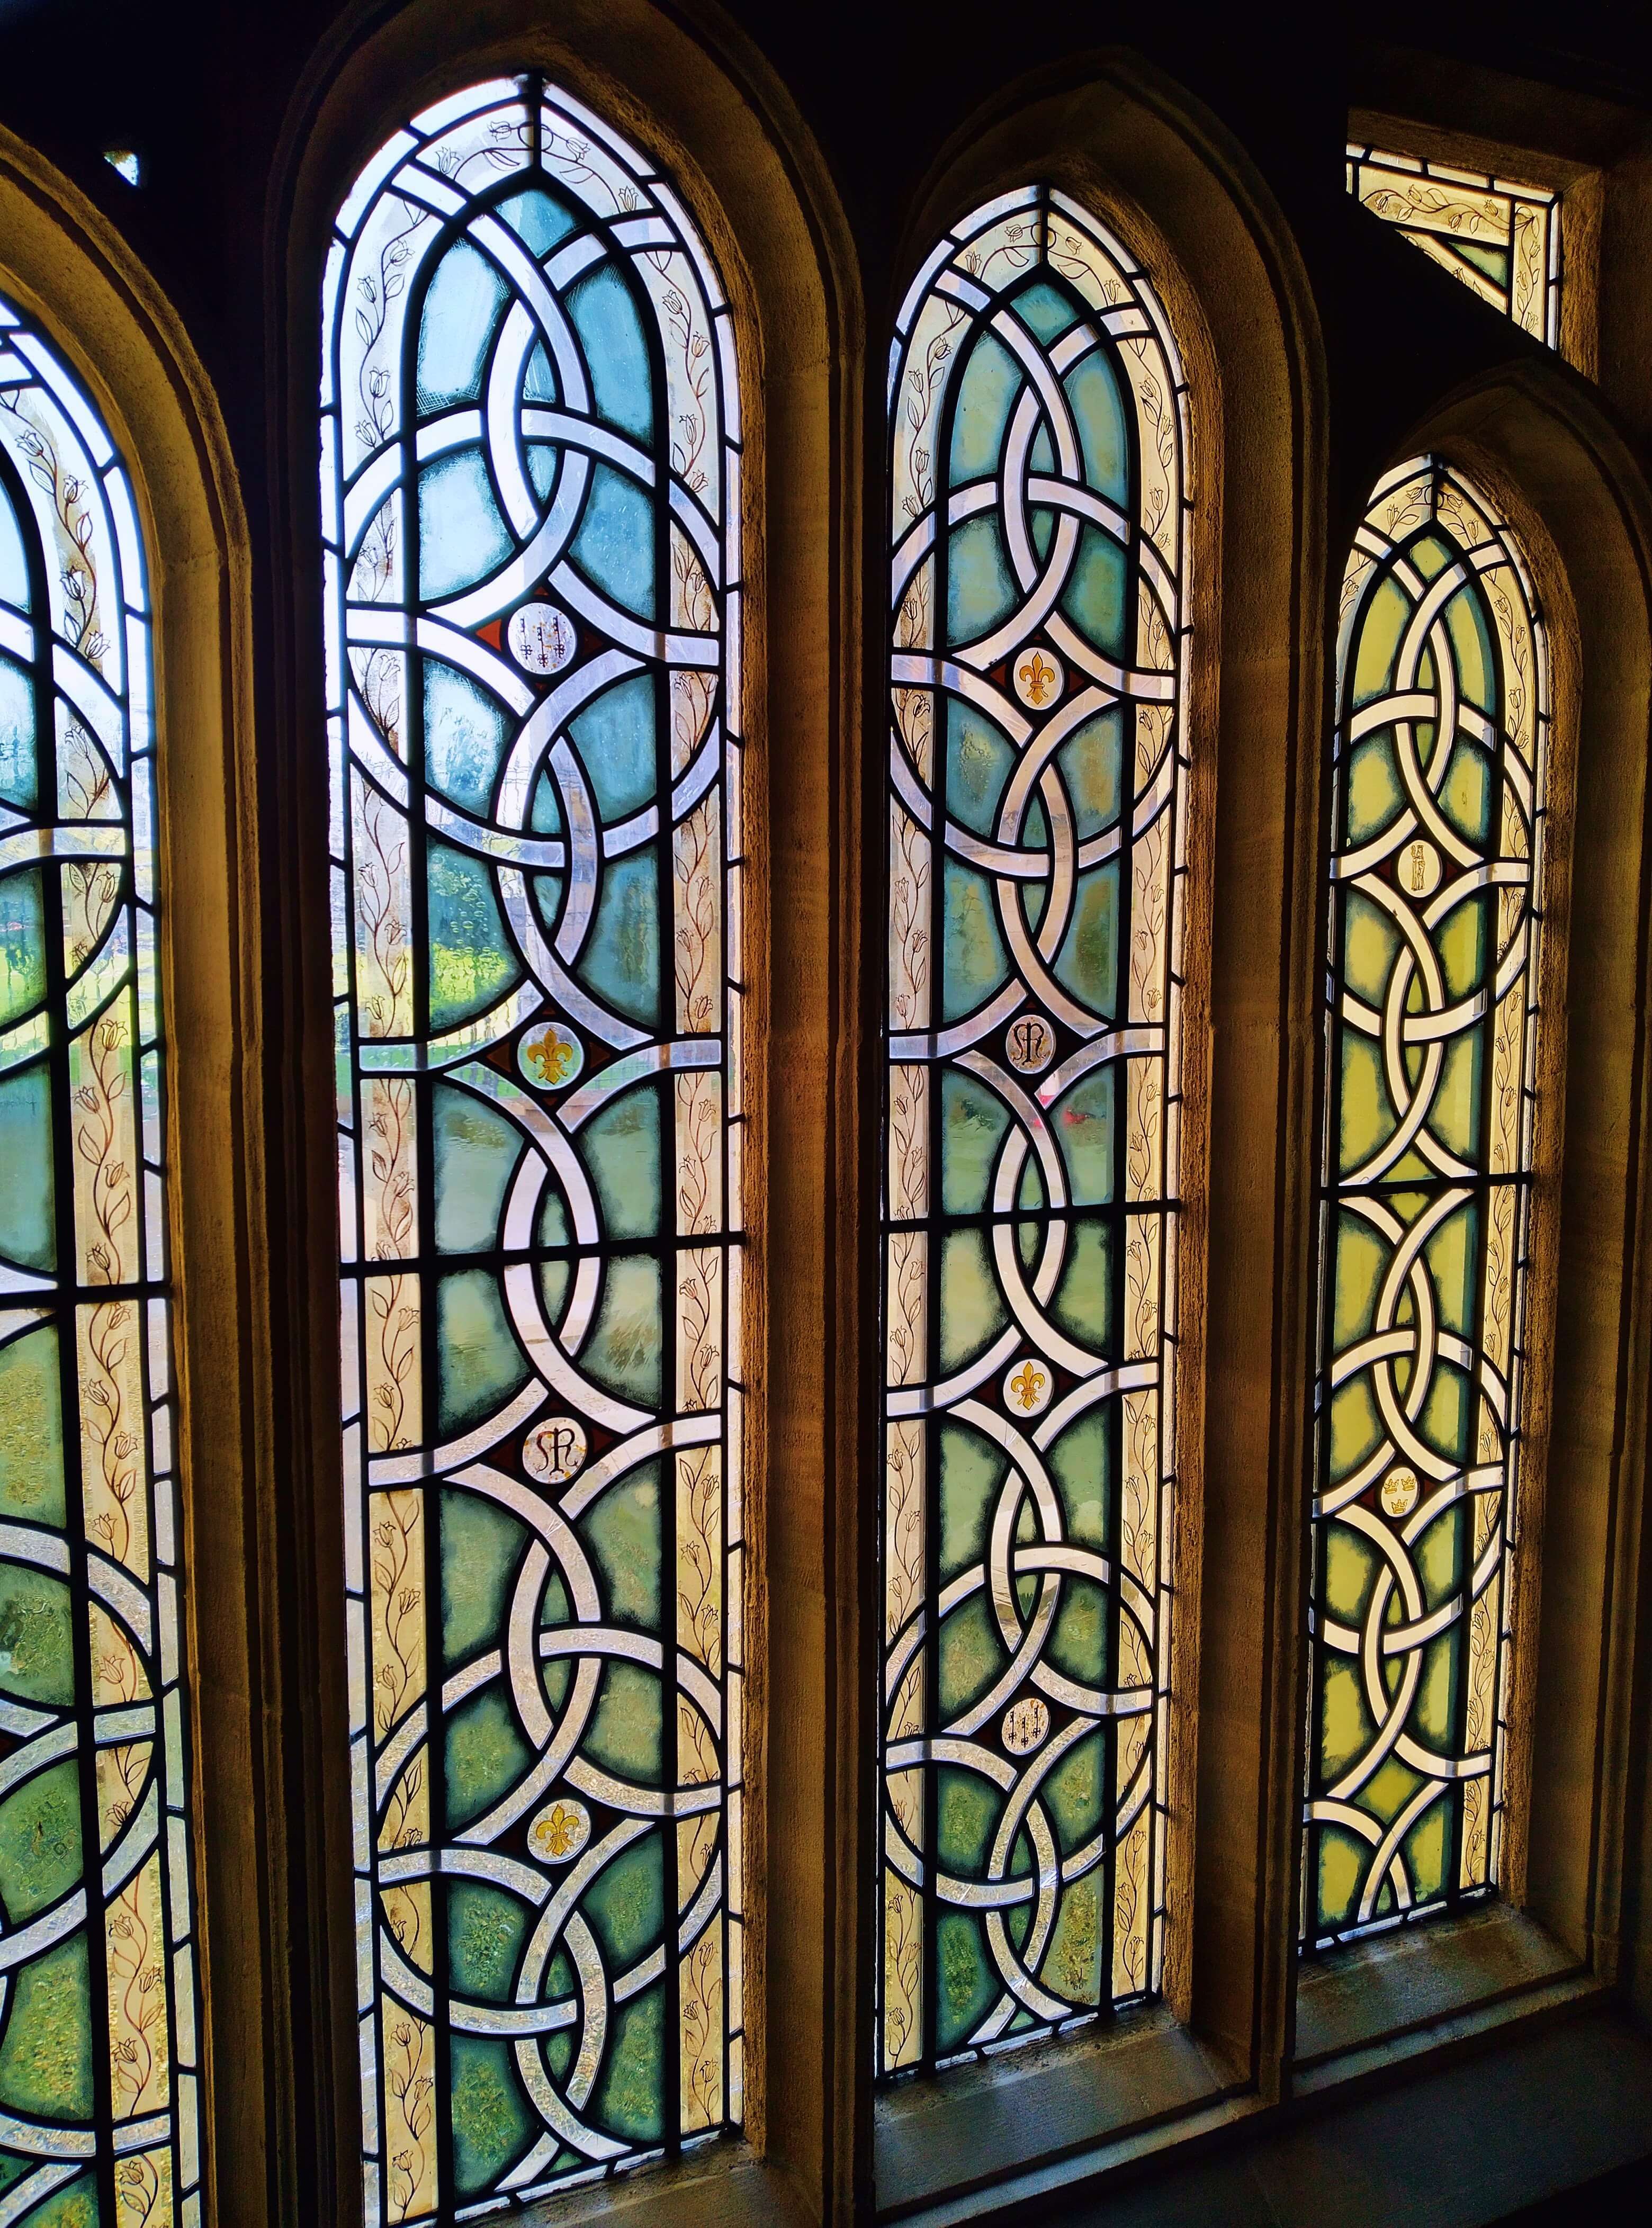 A small set of arched stained glass windows